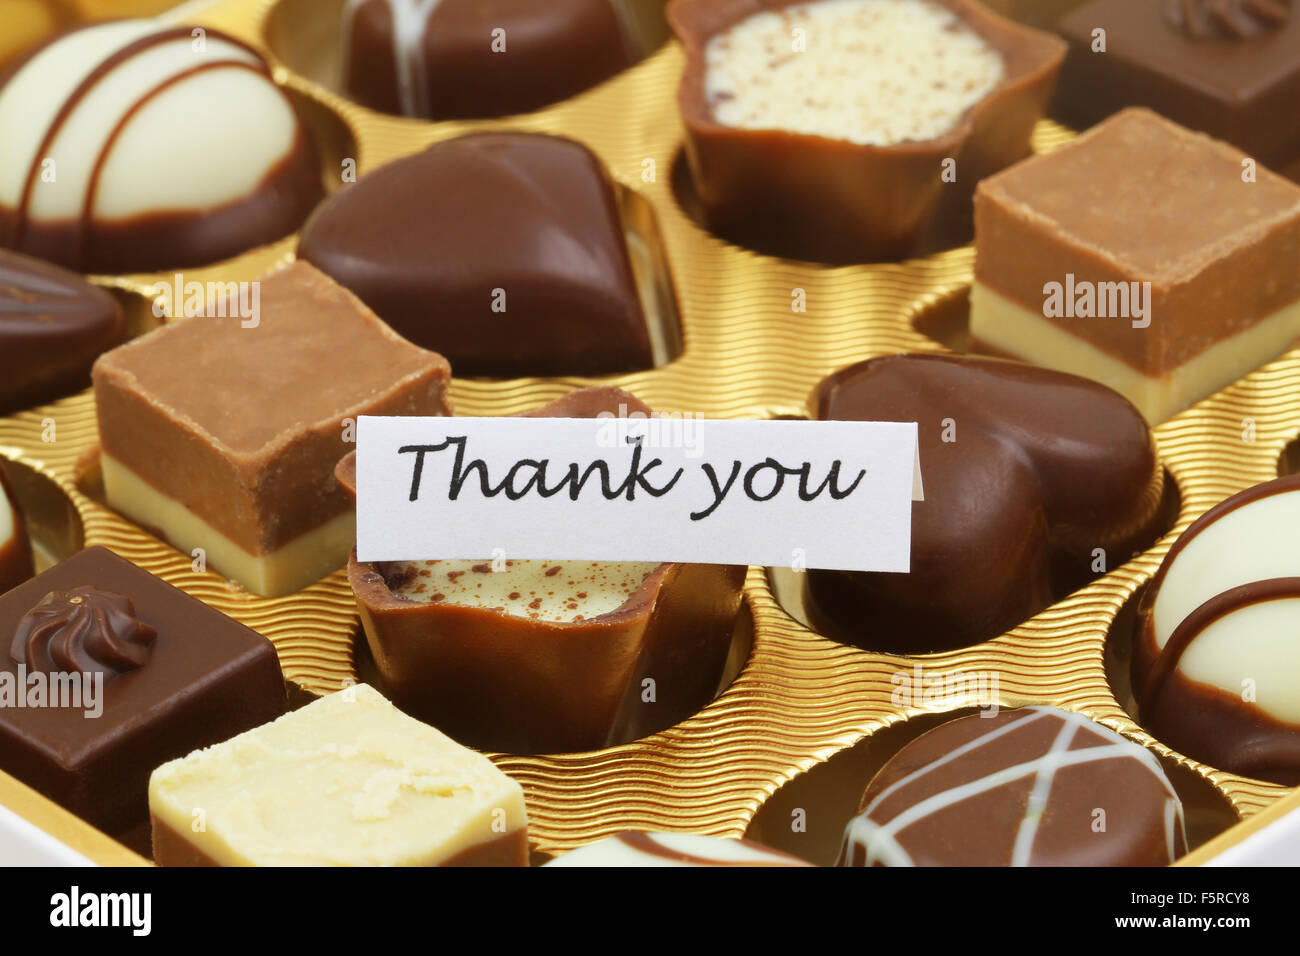 Thank you card with assorted chocolates Stock Photo